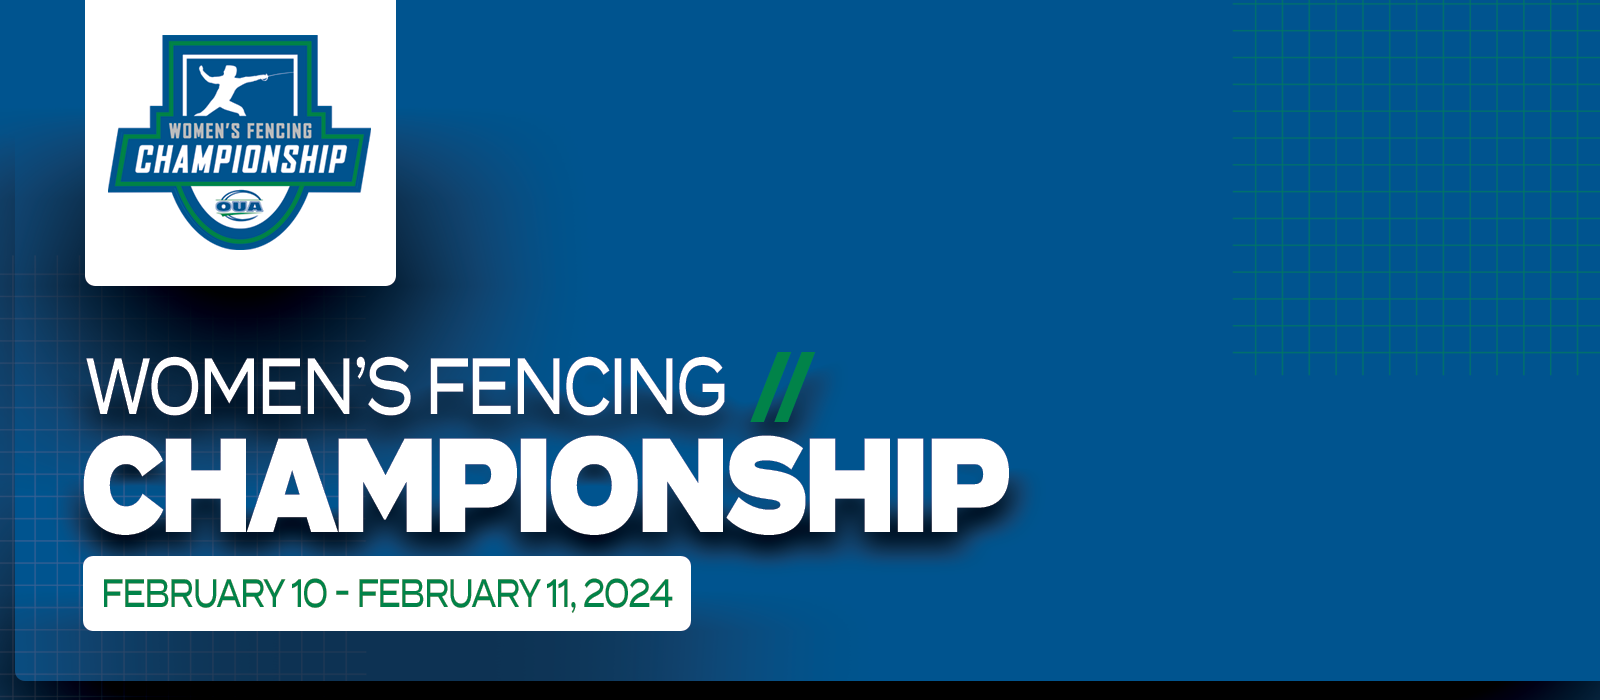 Predominantly blue graphic with large white text on the left side that reads Women’s Fencing Championship, February 10 – February 11, 2024’ beneath the OUA Women’s Fencing Championship logo